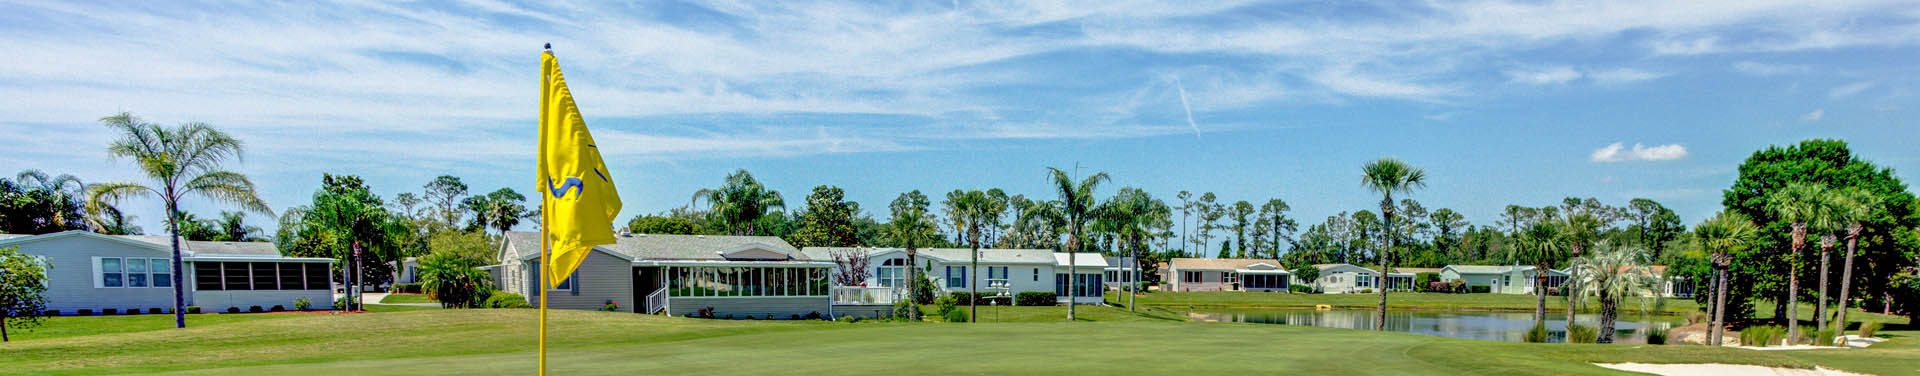 Photo of the lush green golf field surrounded by the community of mobile homes, with nice green trees